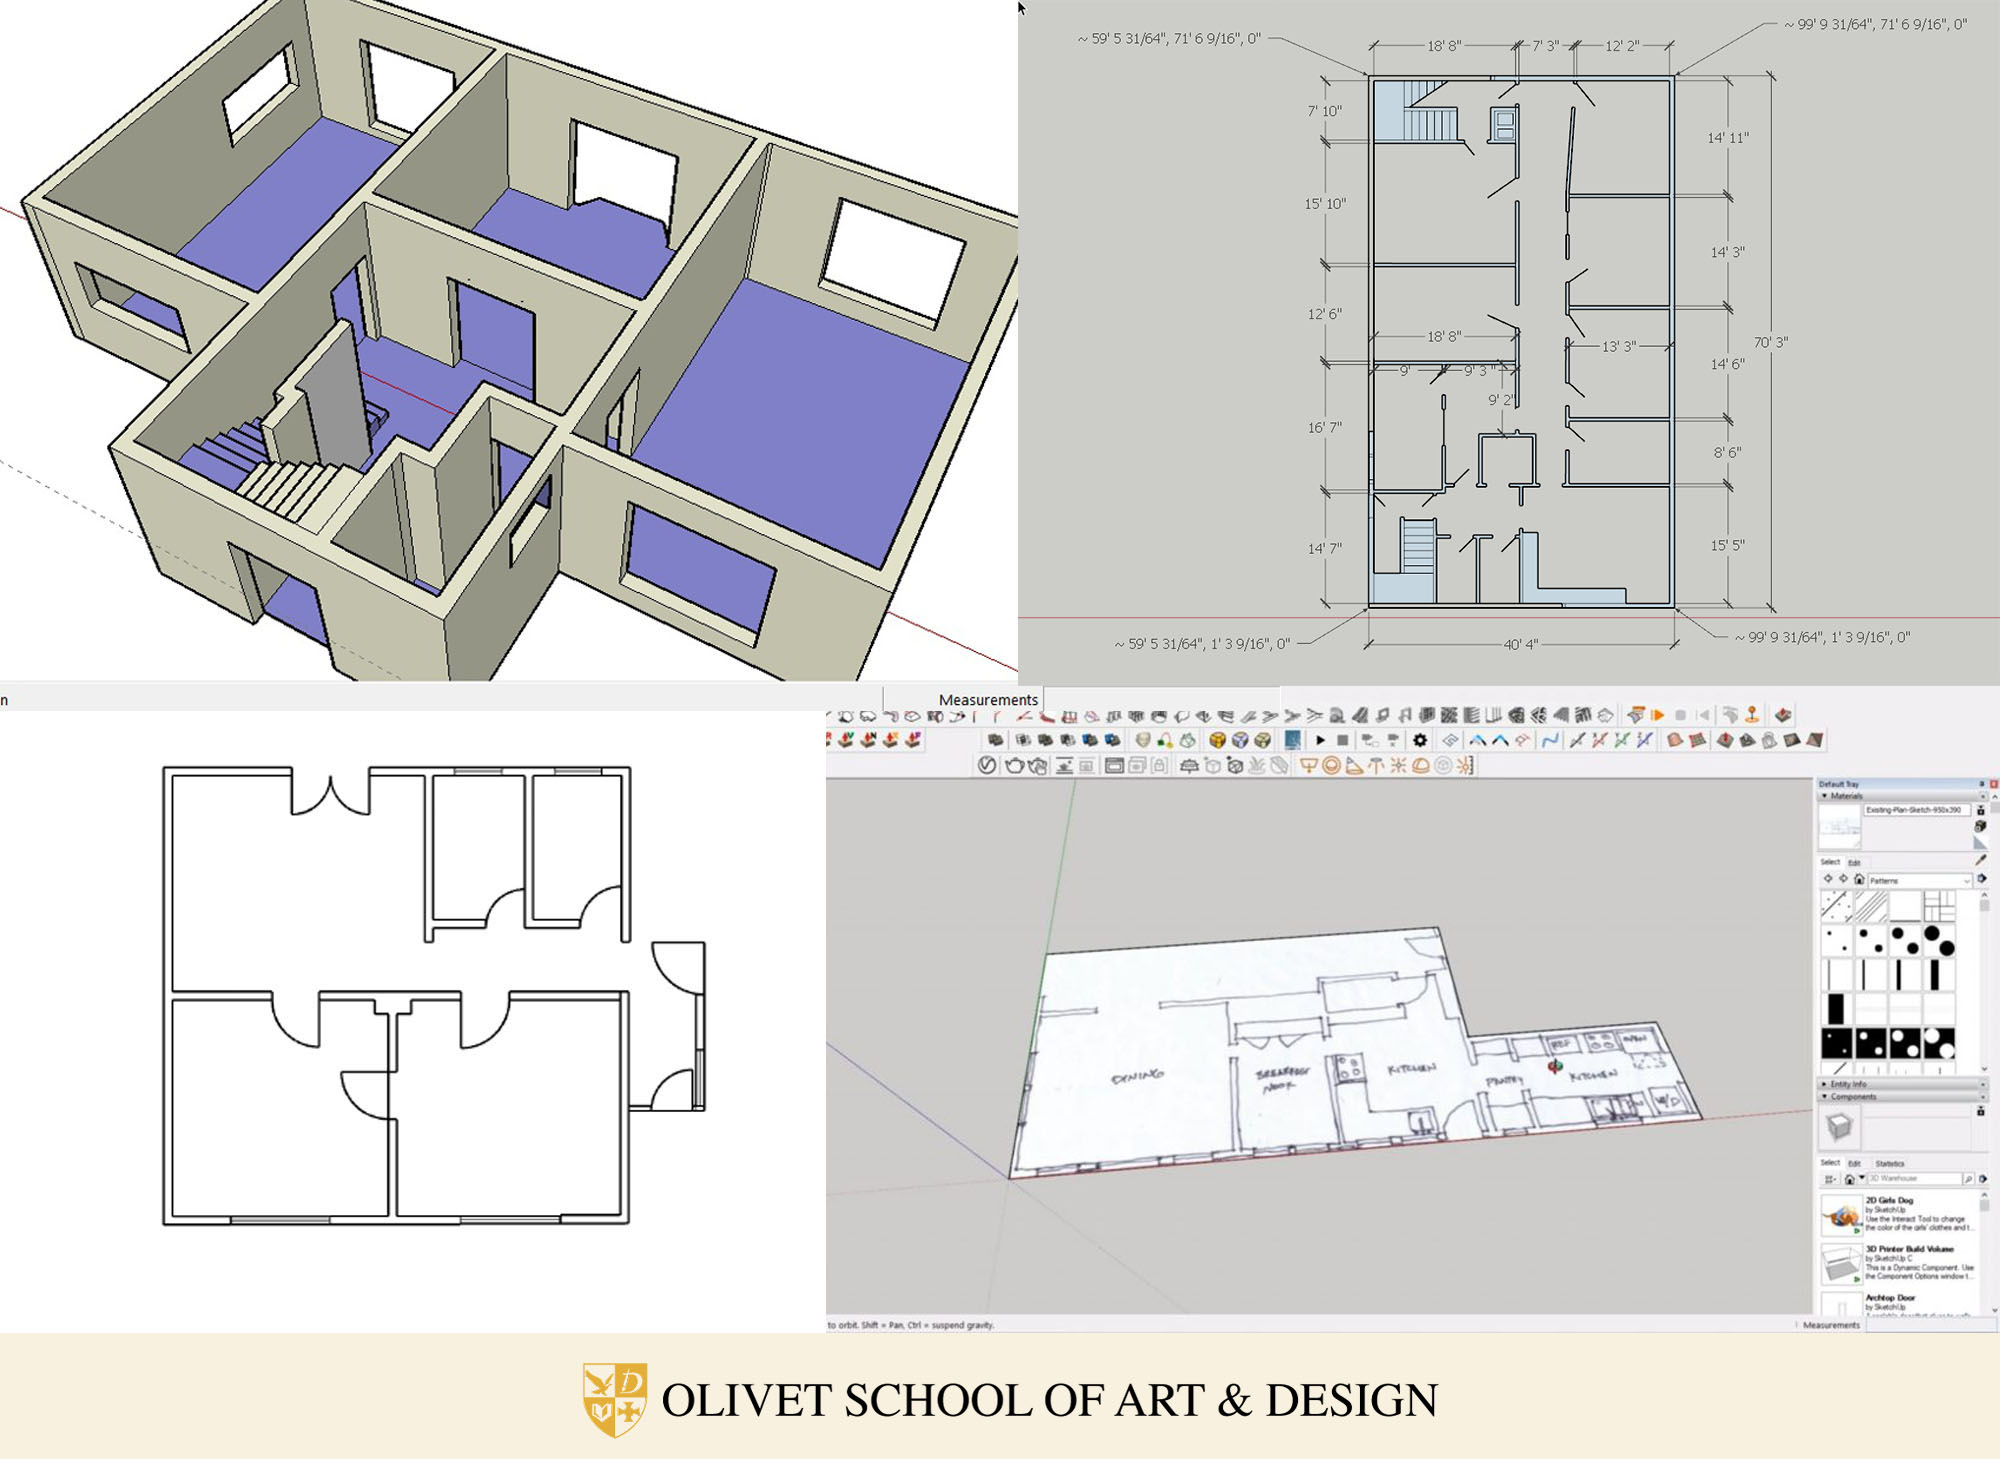 OSAD 3D Modeling Class: Hands-On Experience in Architectural Applications
